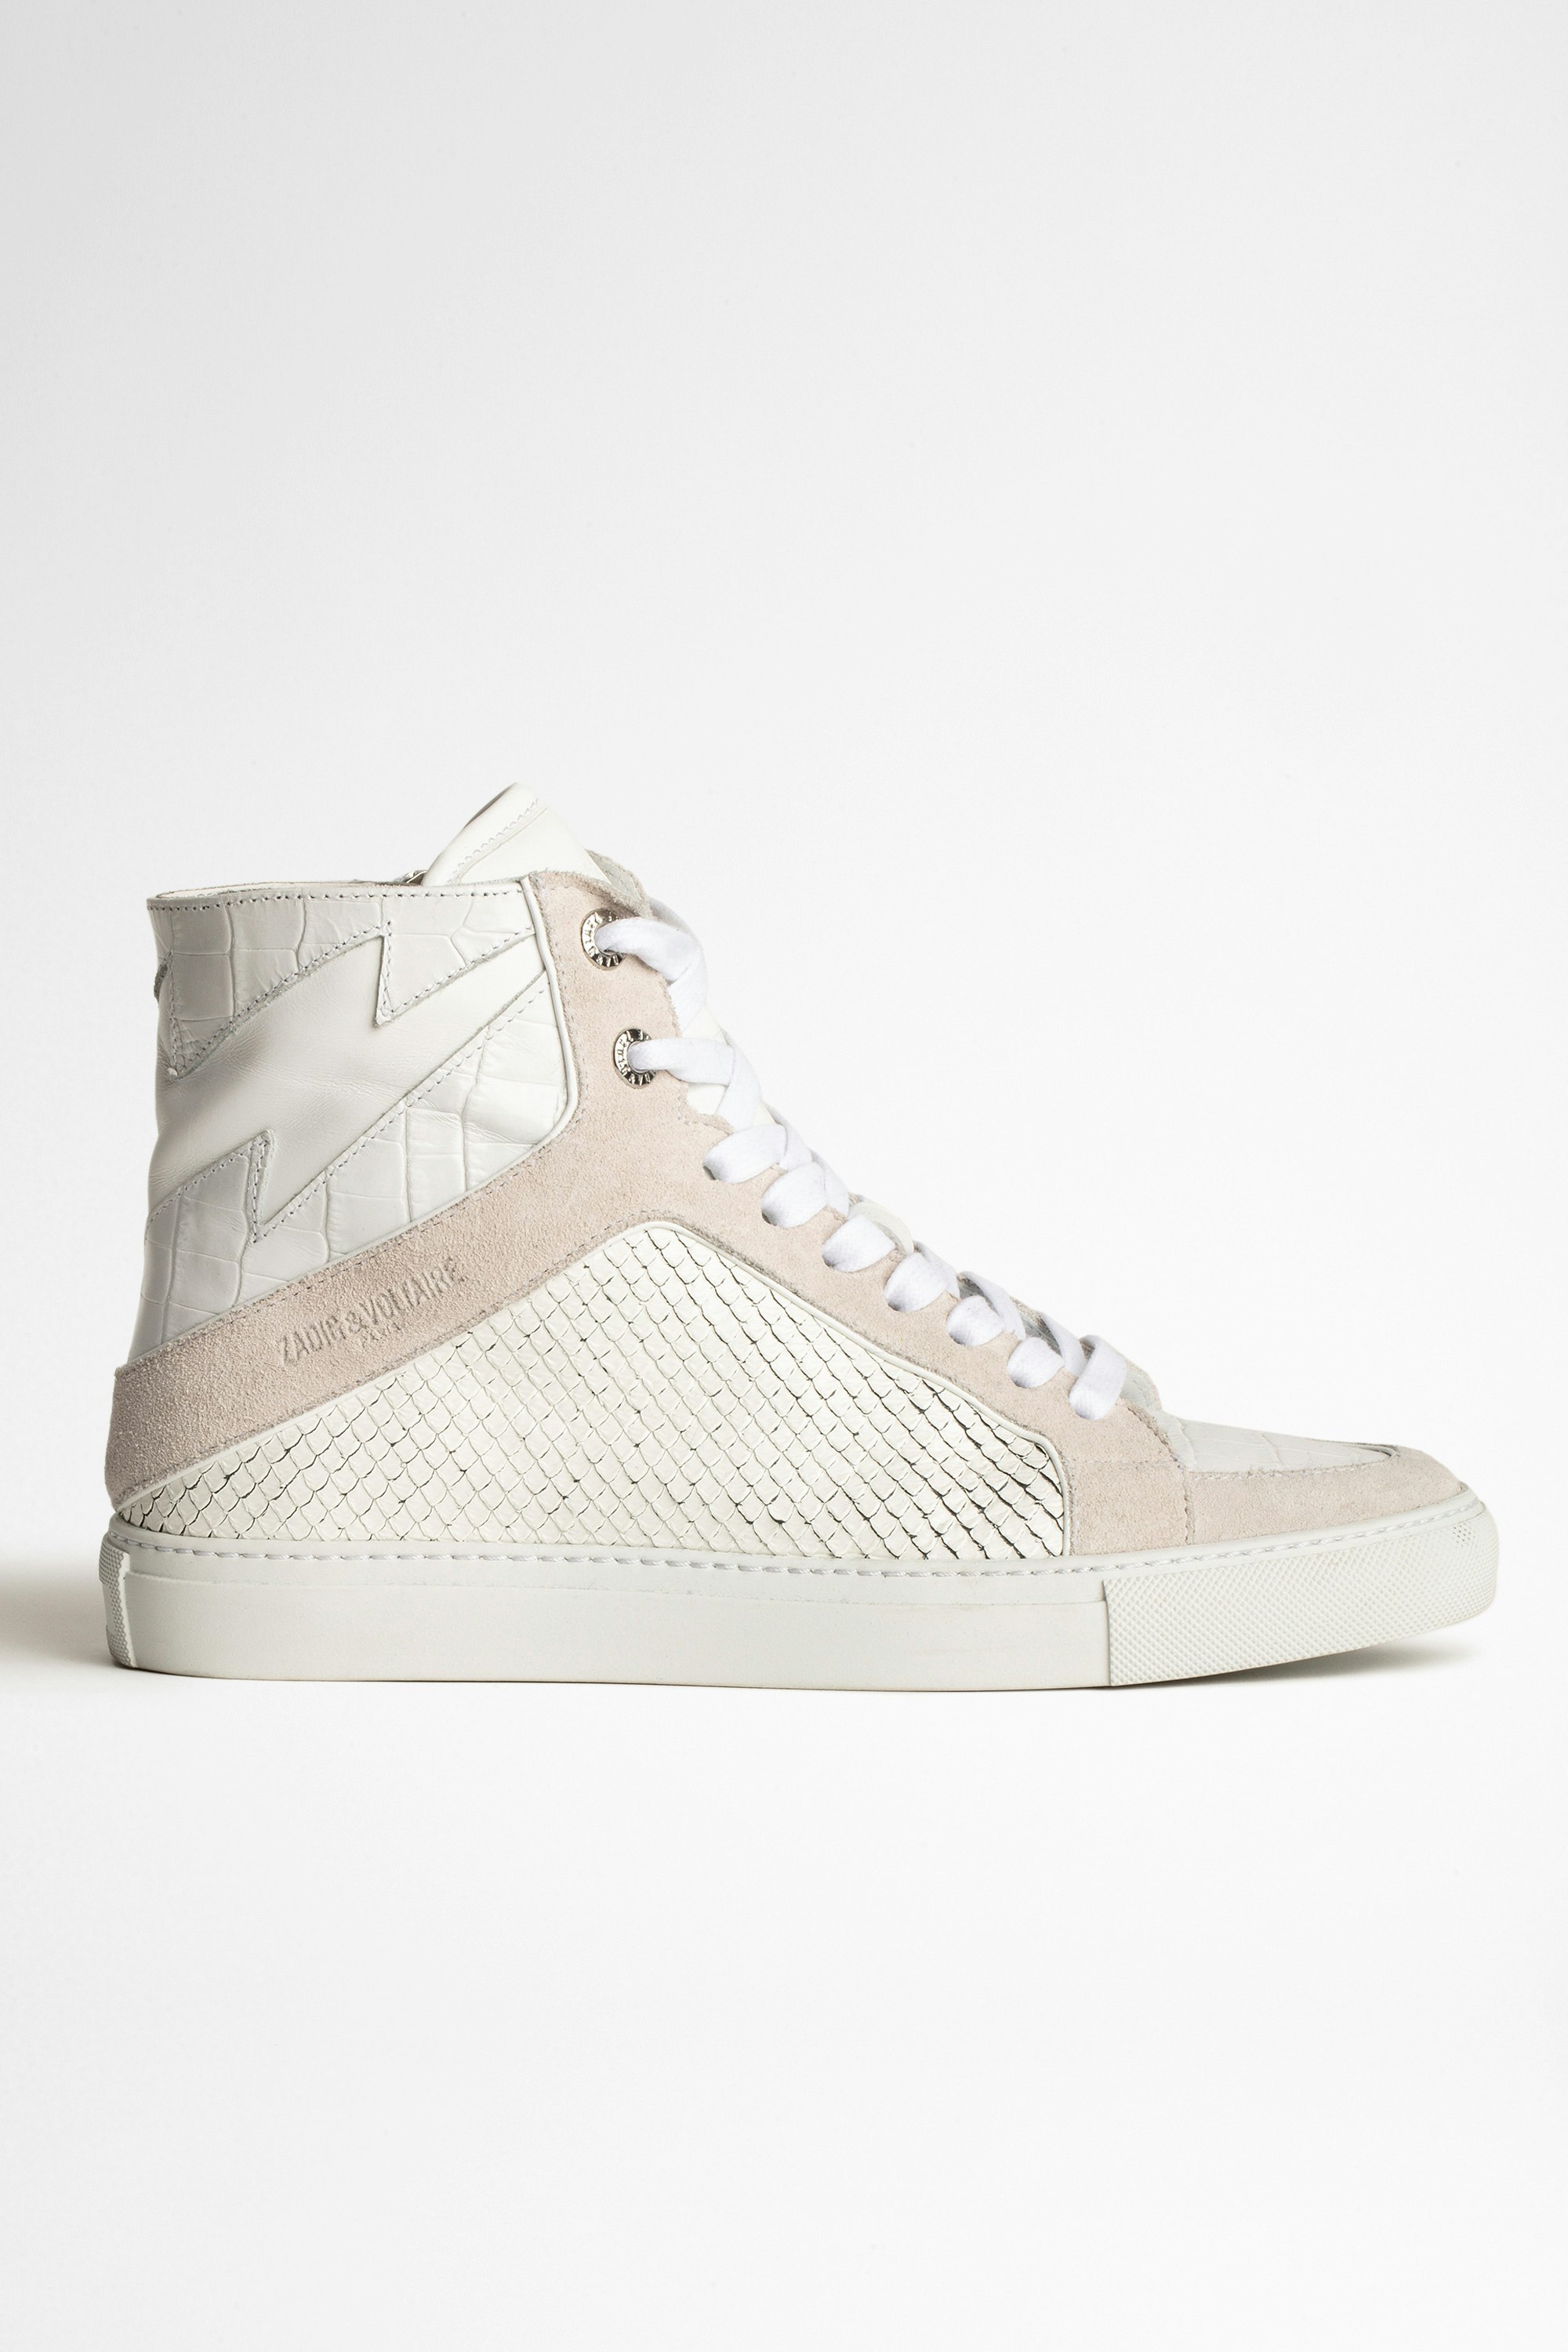 ZV1747 High Flash Keith レザースニーカー Women’s white snakeskin-effect leather high-top sneakers